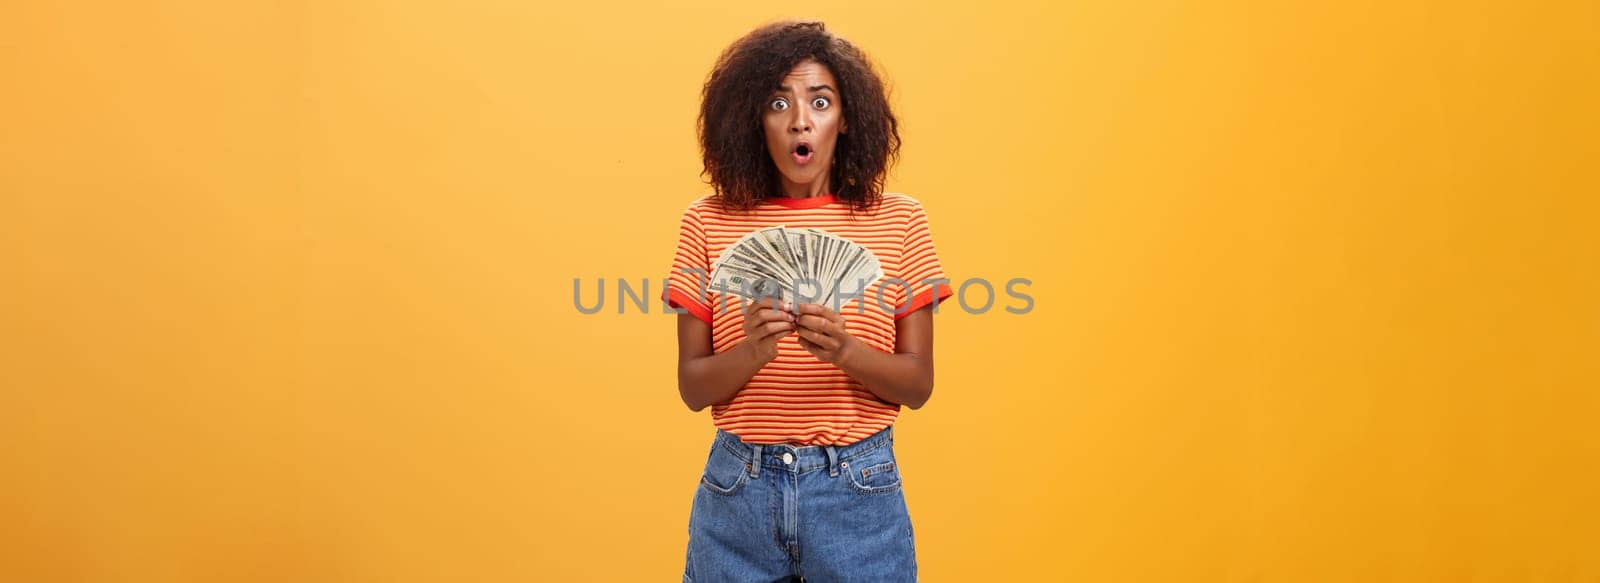 Woman shocked finding lots of cash in safe. Portrait of surprised speechless good-looking dark-skinned female with curly haircut folding lips gasping holding money posing over orange background.